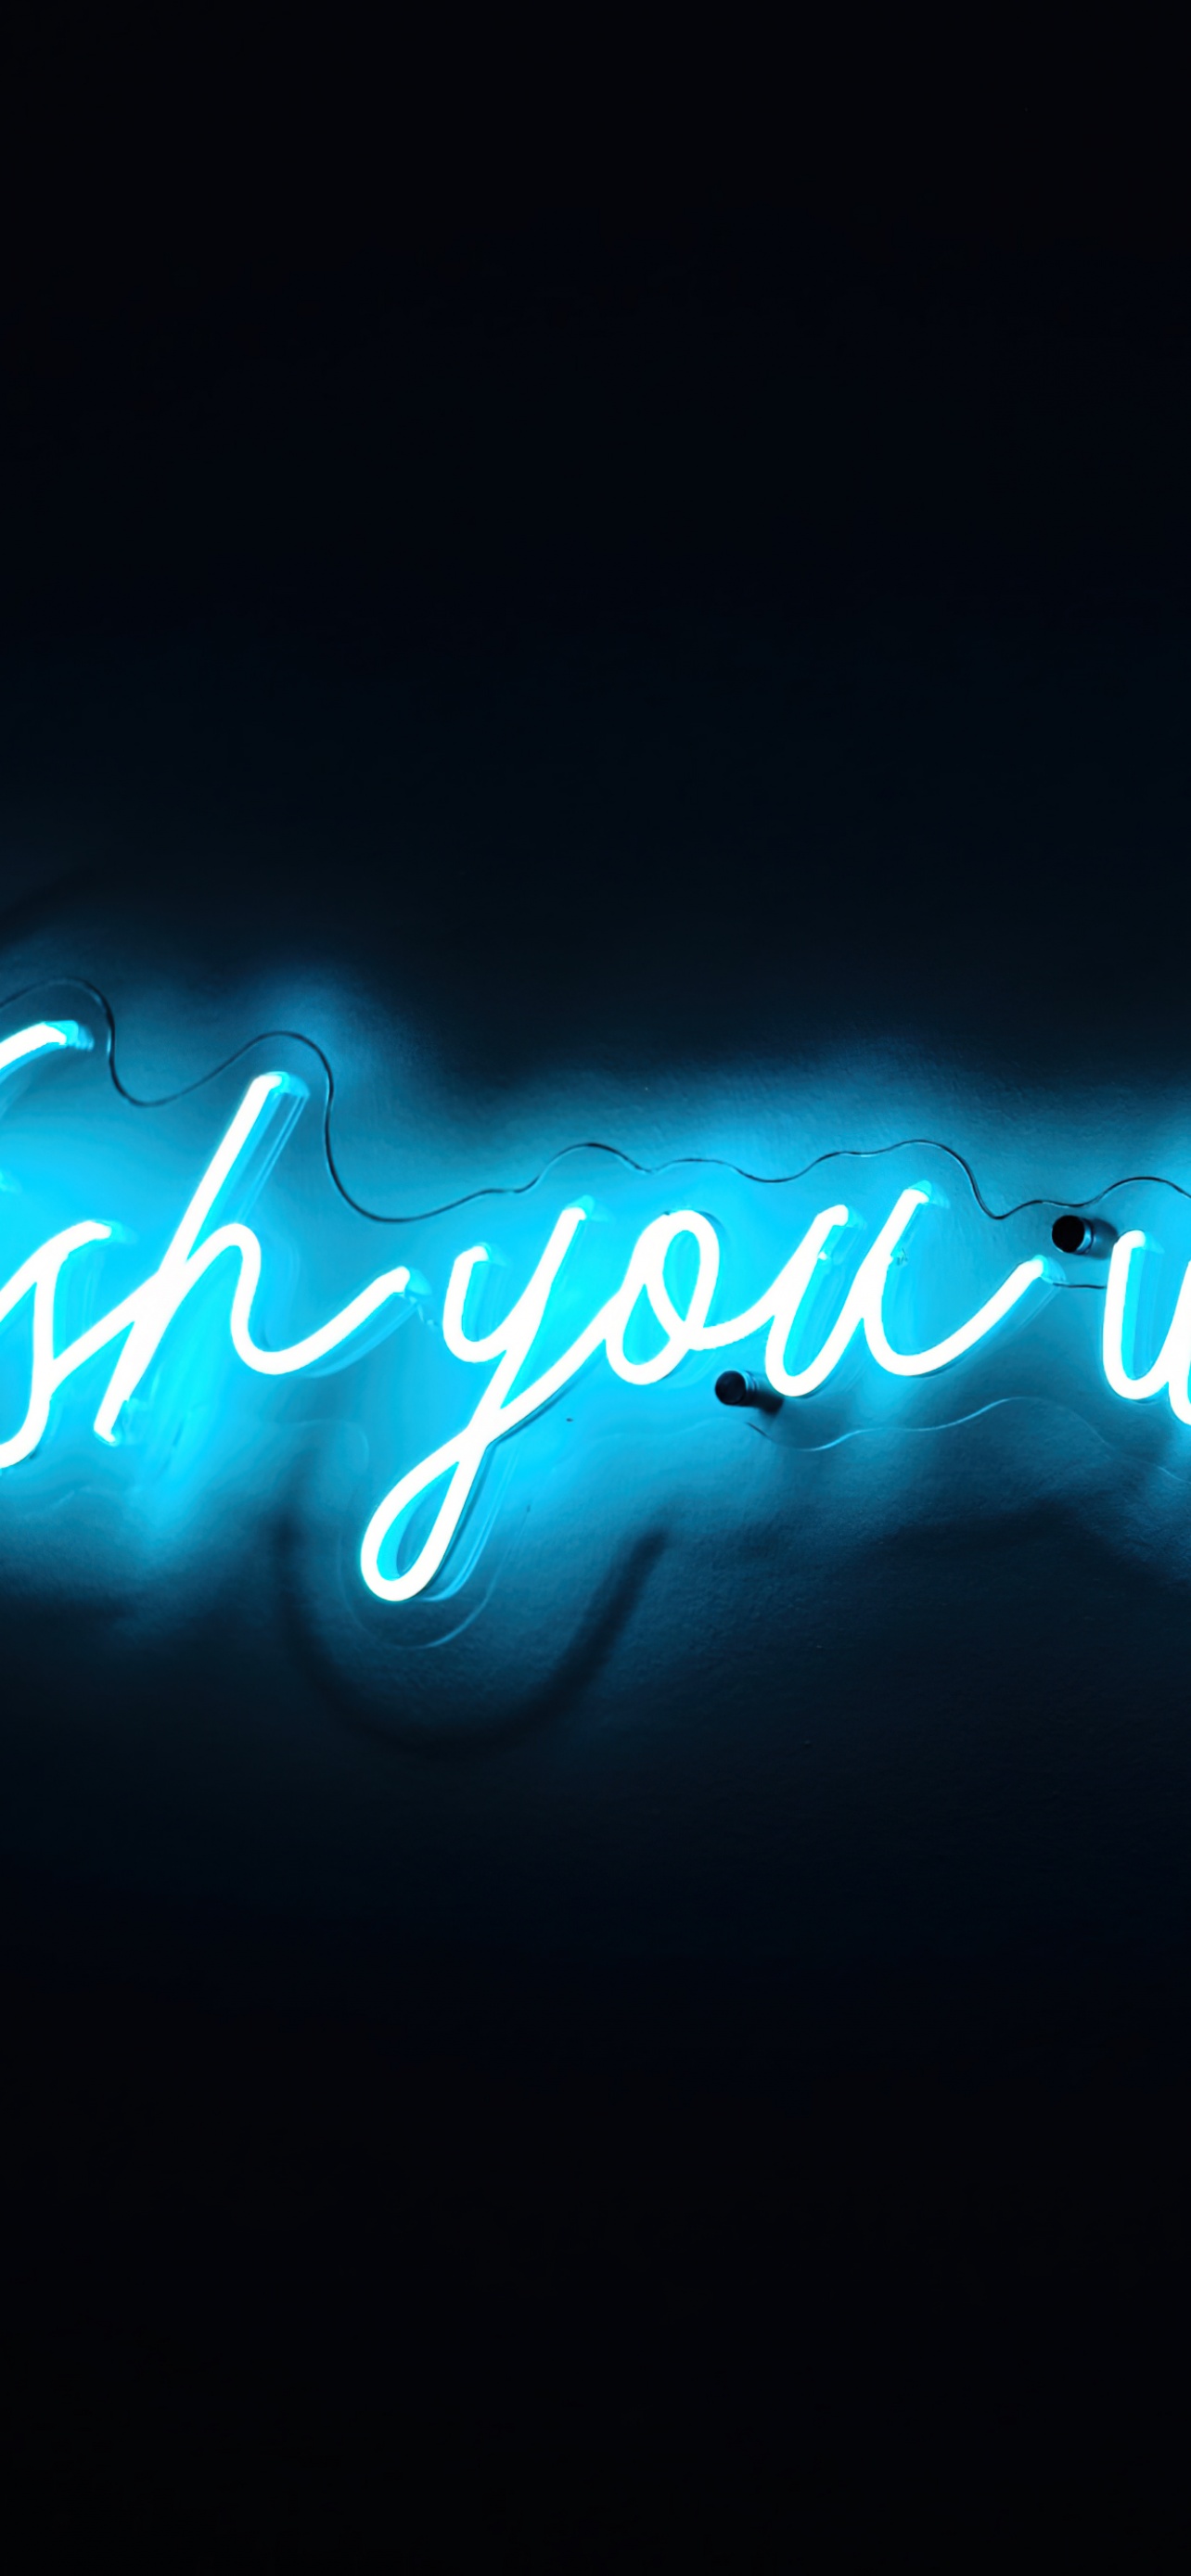 Wish you were here Wallpaper 4K, Love quotes, Missing quotes, Sad quotes, Mood, Quotes